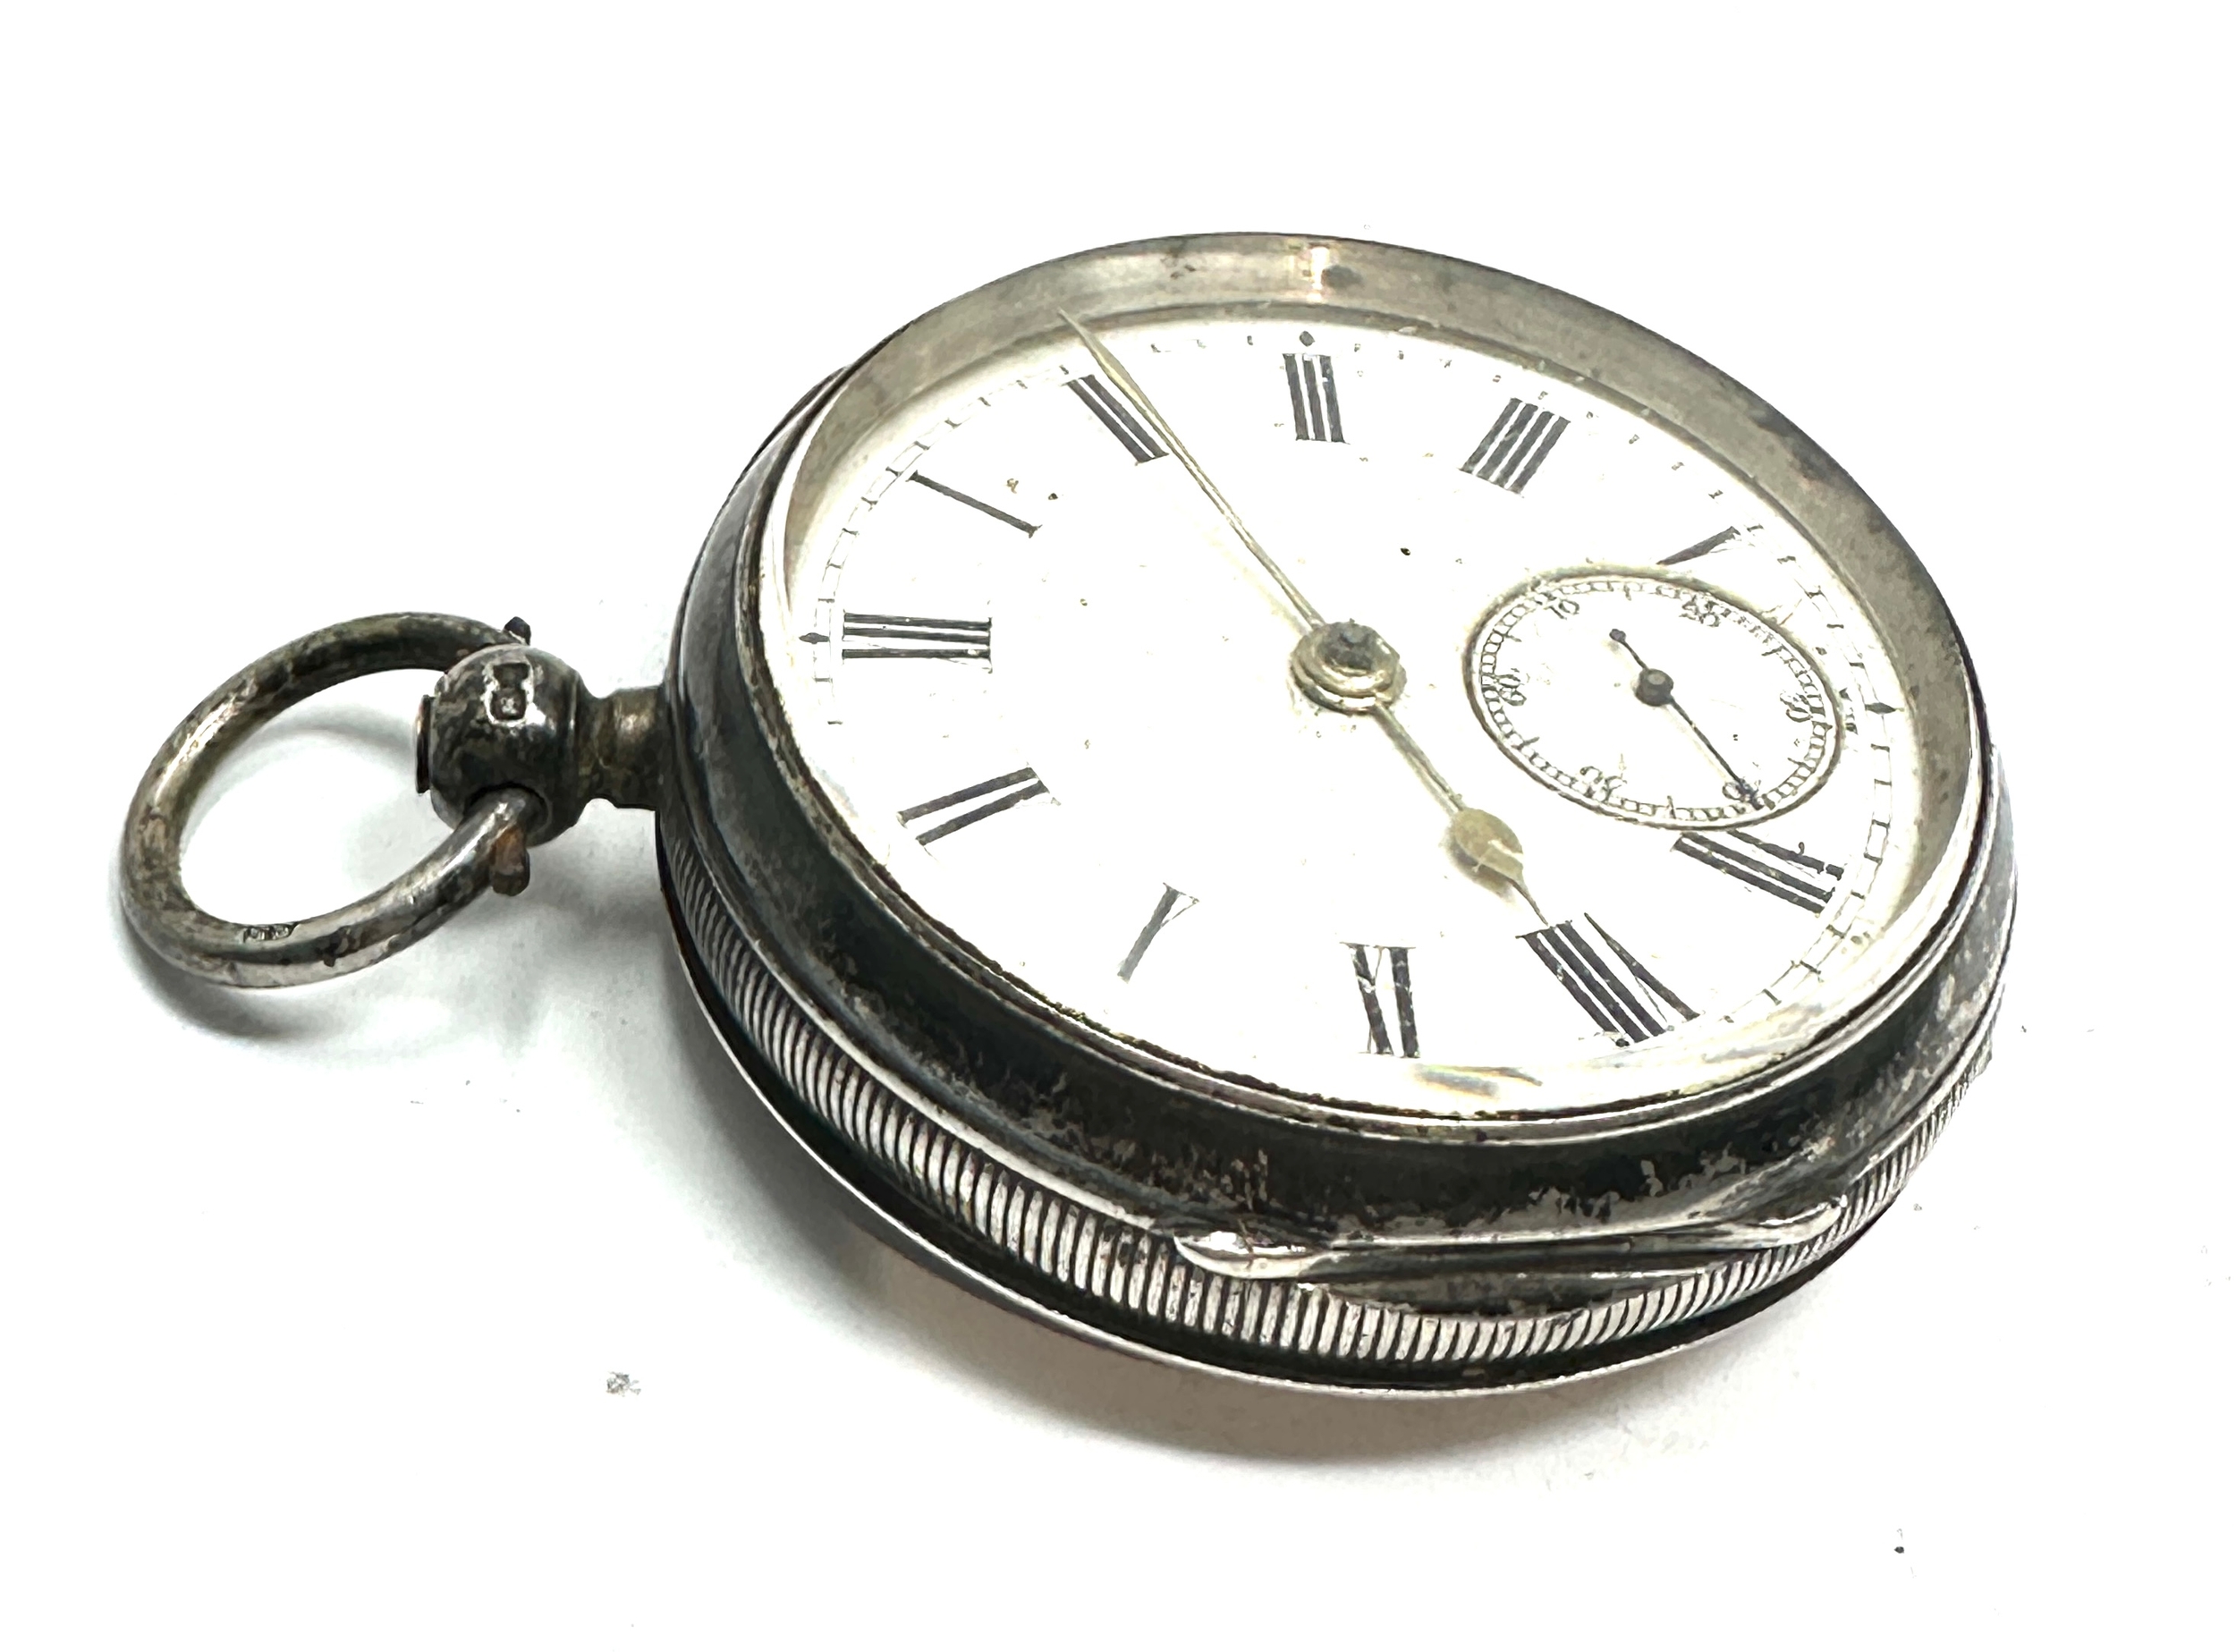 Antique silver pocket watch A monty London the balance spins freely fully wound not working - Image 2 of 4